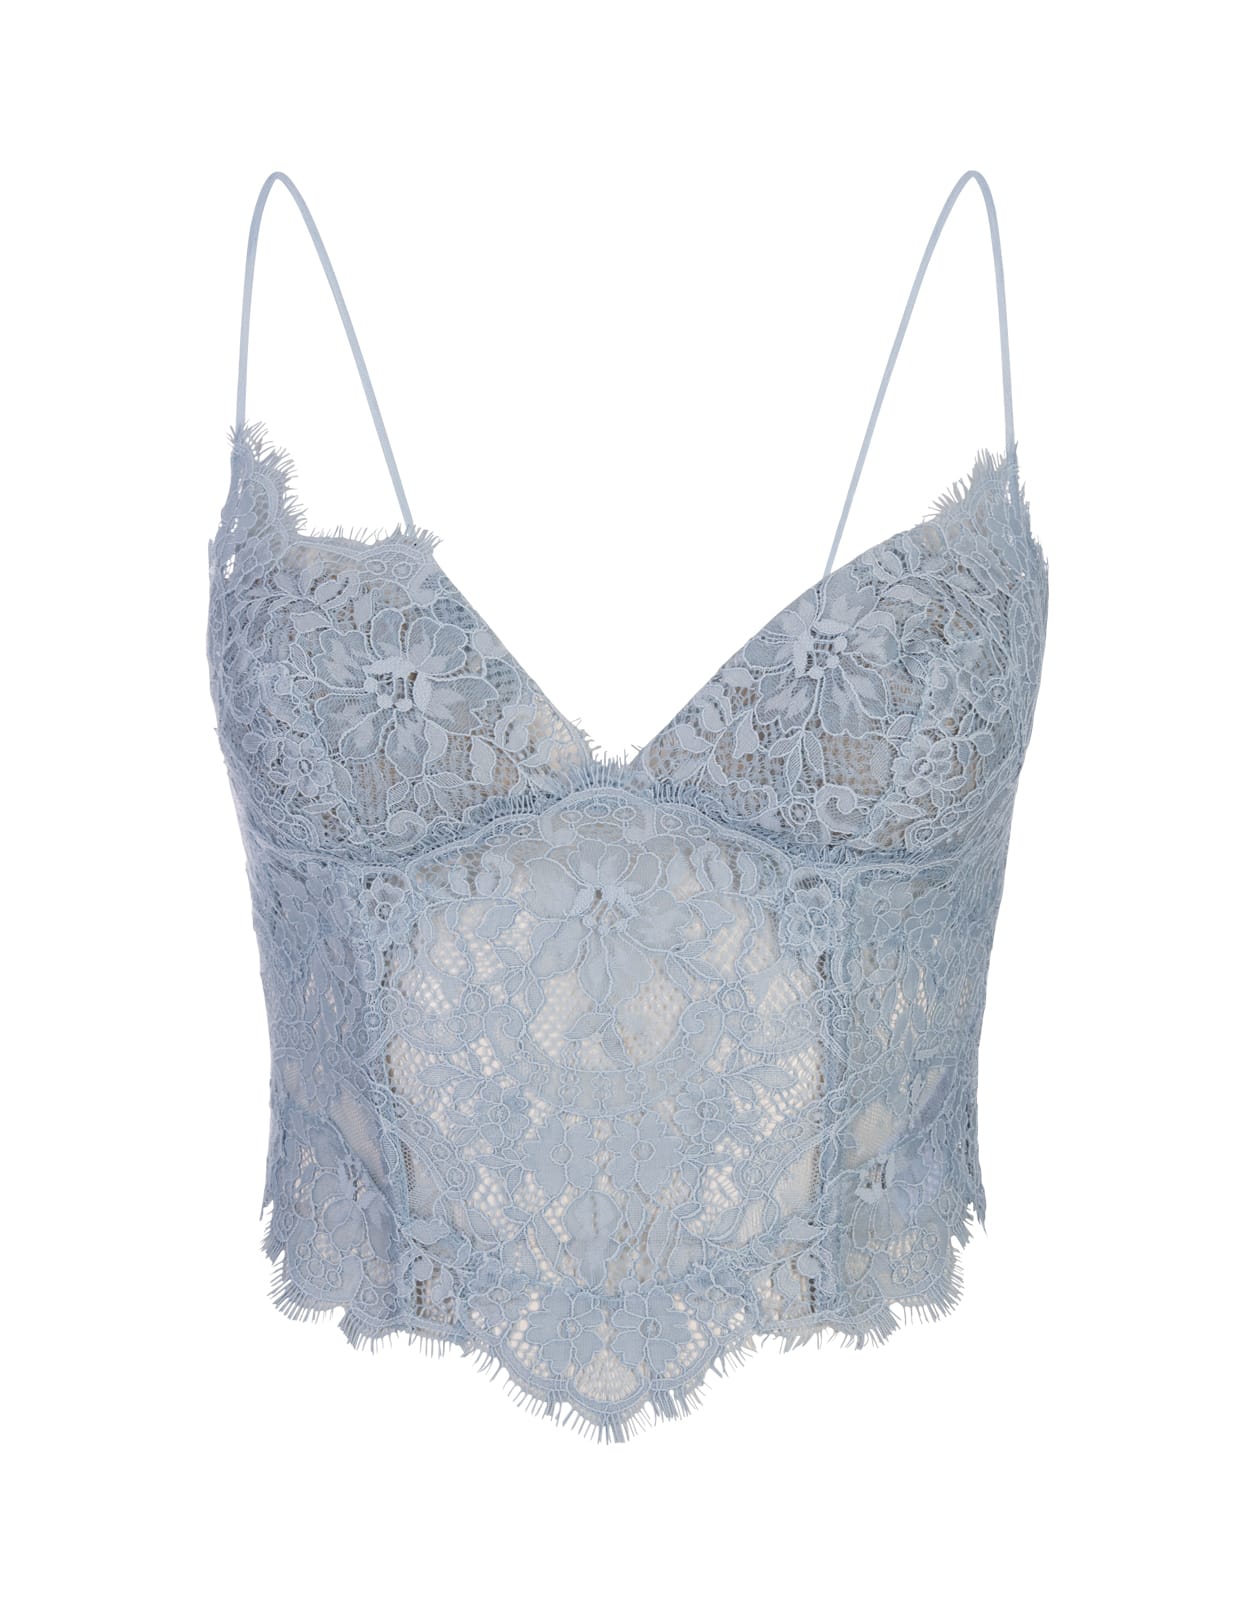 All-over Light Blue Lace Top